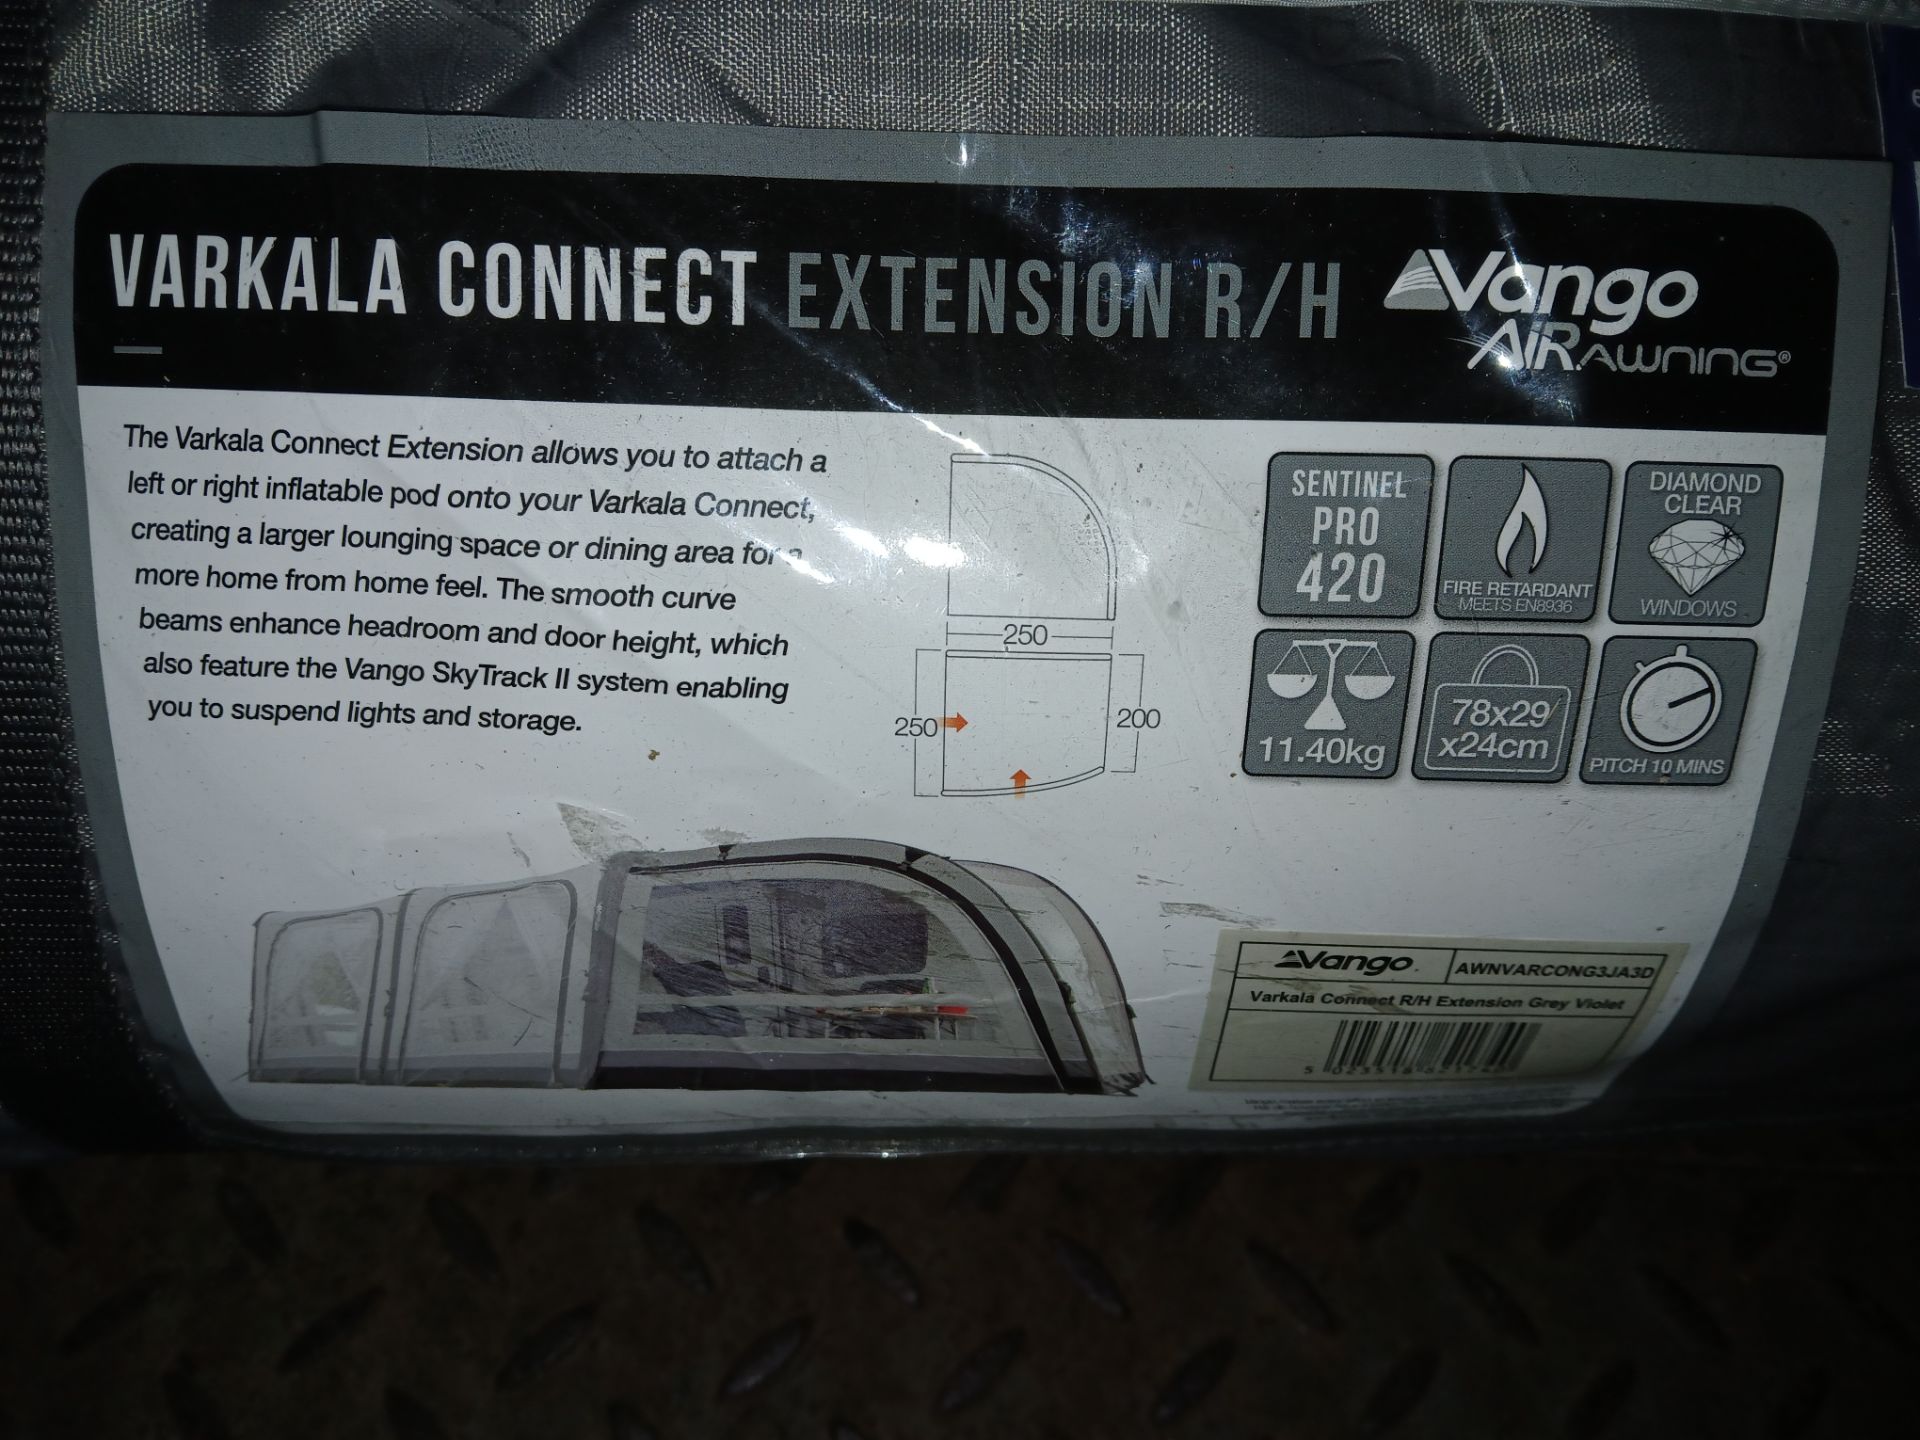 Vango Air Awning Varkala Connect Extension R/H - May be comptaible with Lot 106 (Please note, - Bild 2 aus 3